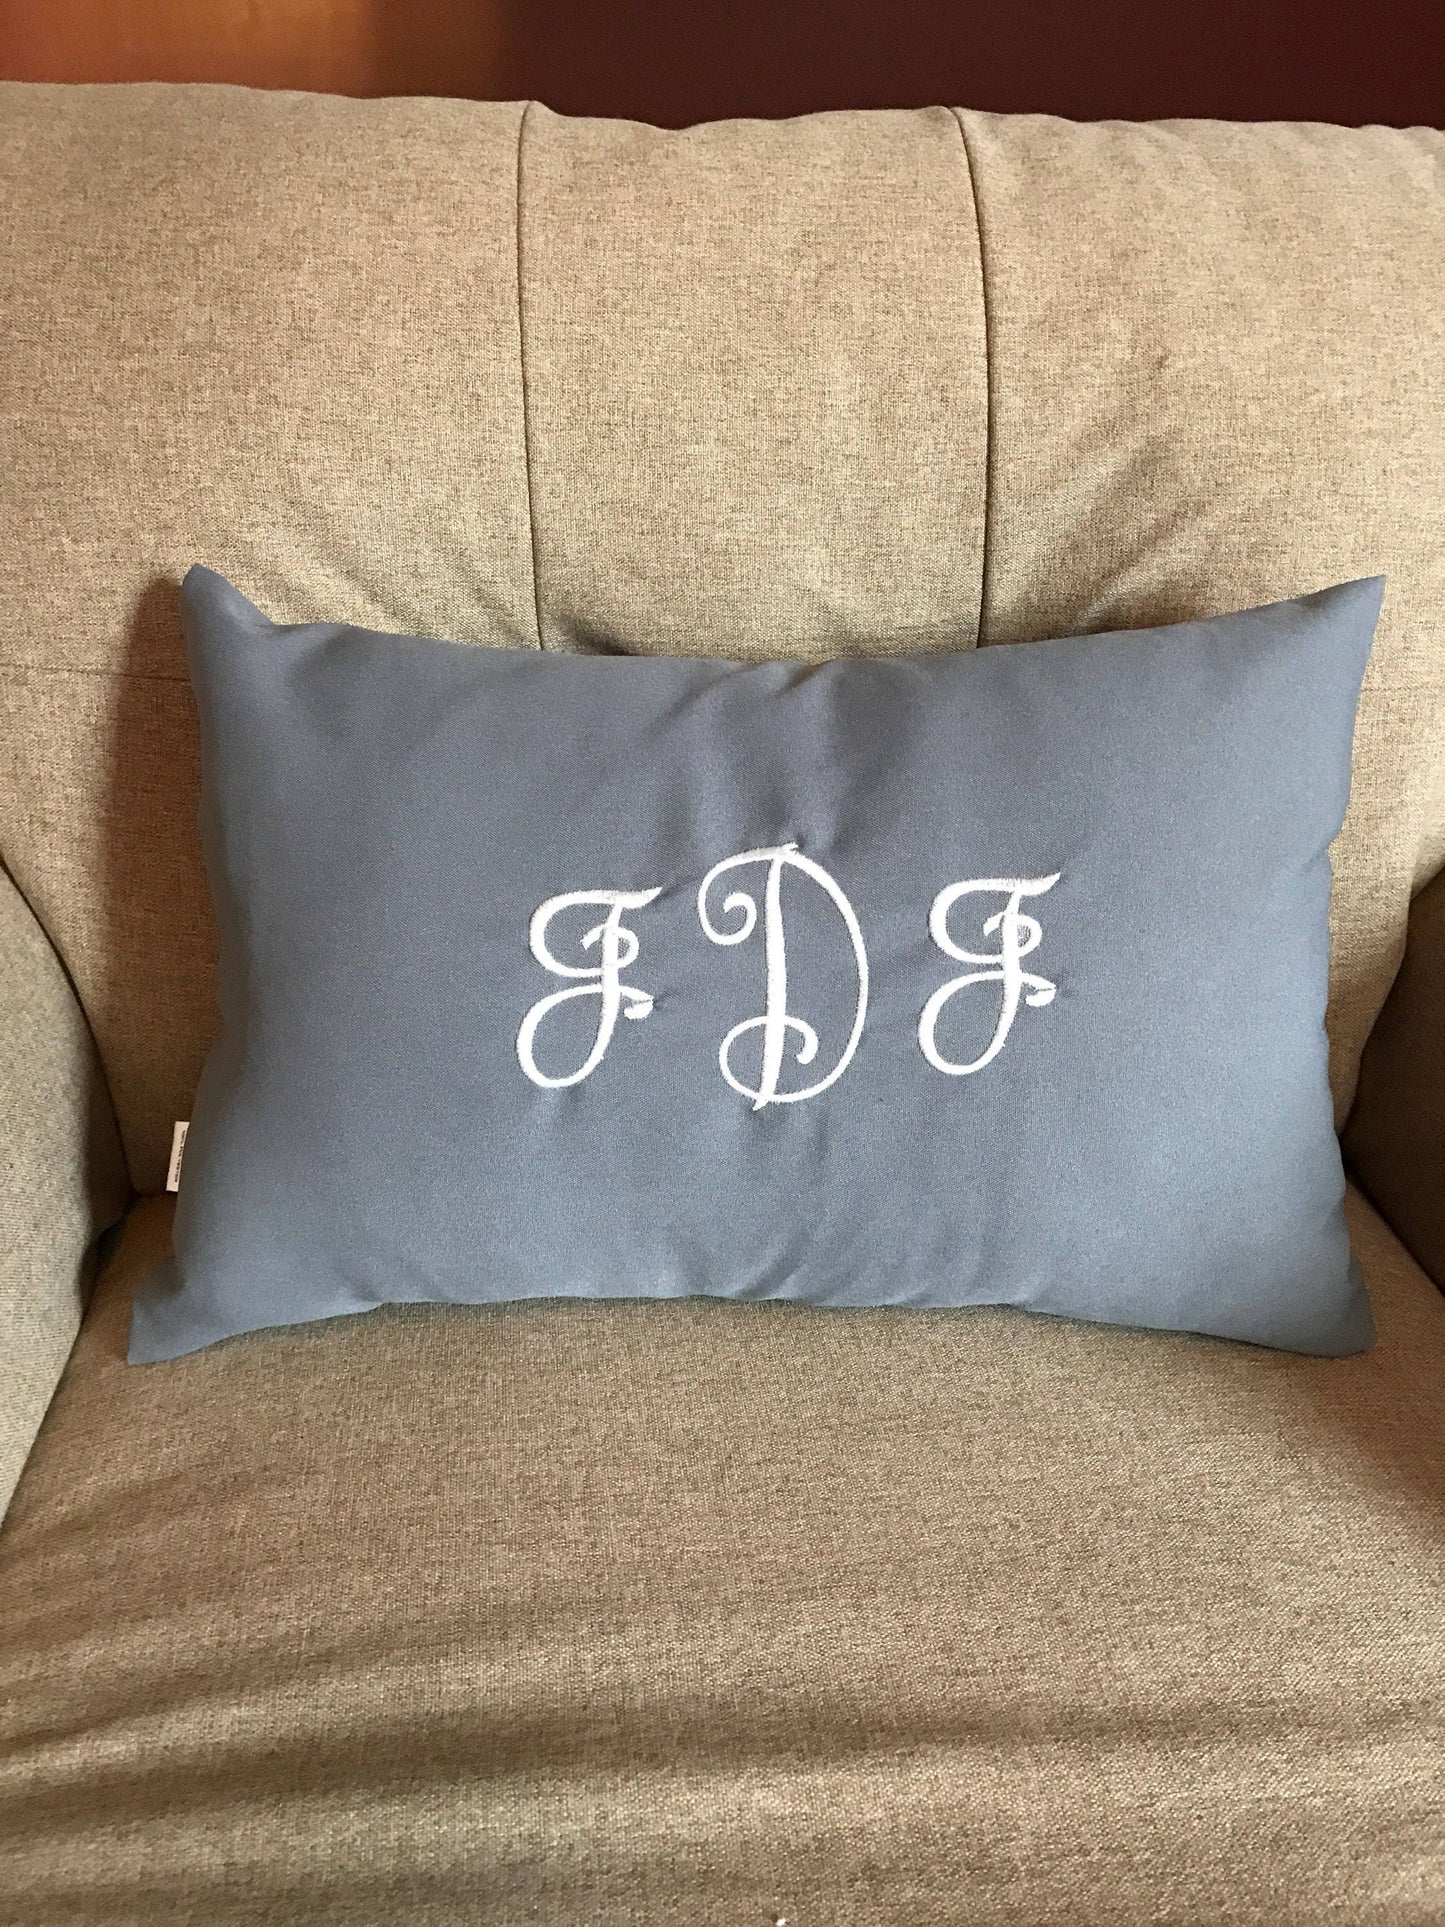 Embroidered - Monogrammed Pillow Cover/Sham - Customized - Personalized Gift Idea - Polyester Sham